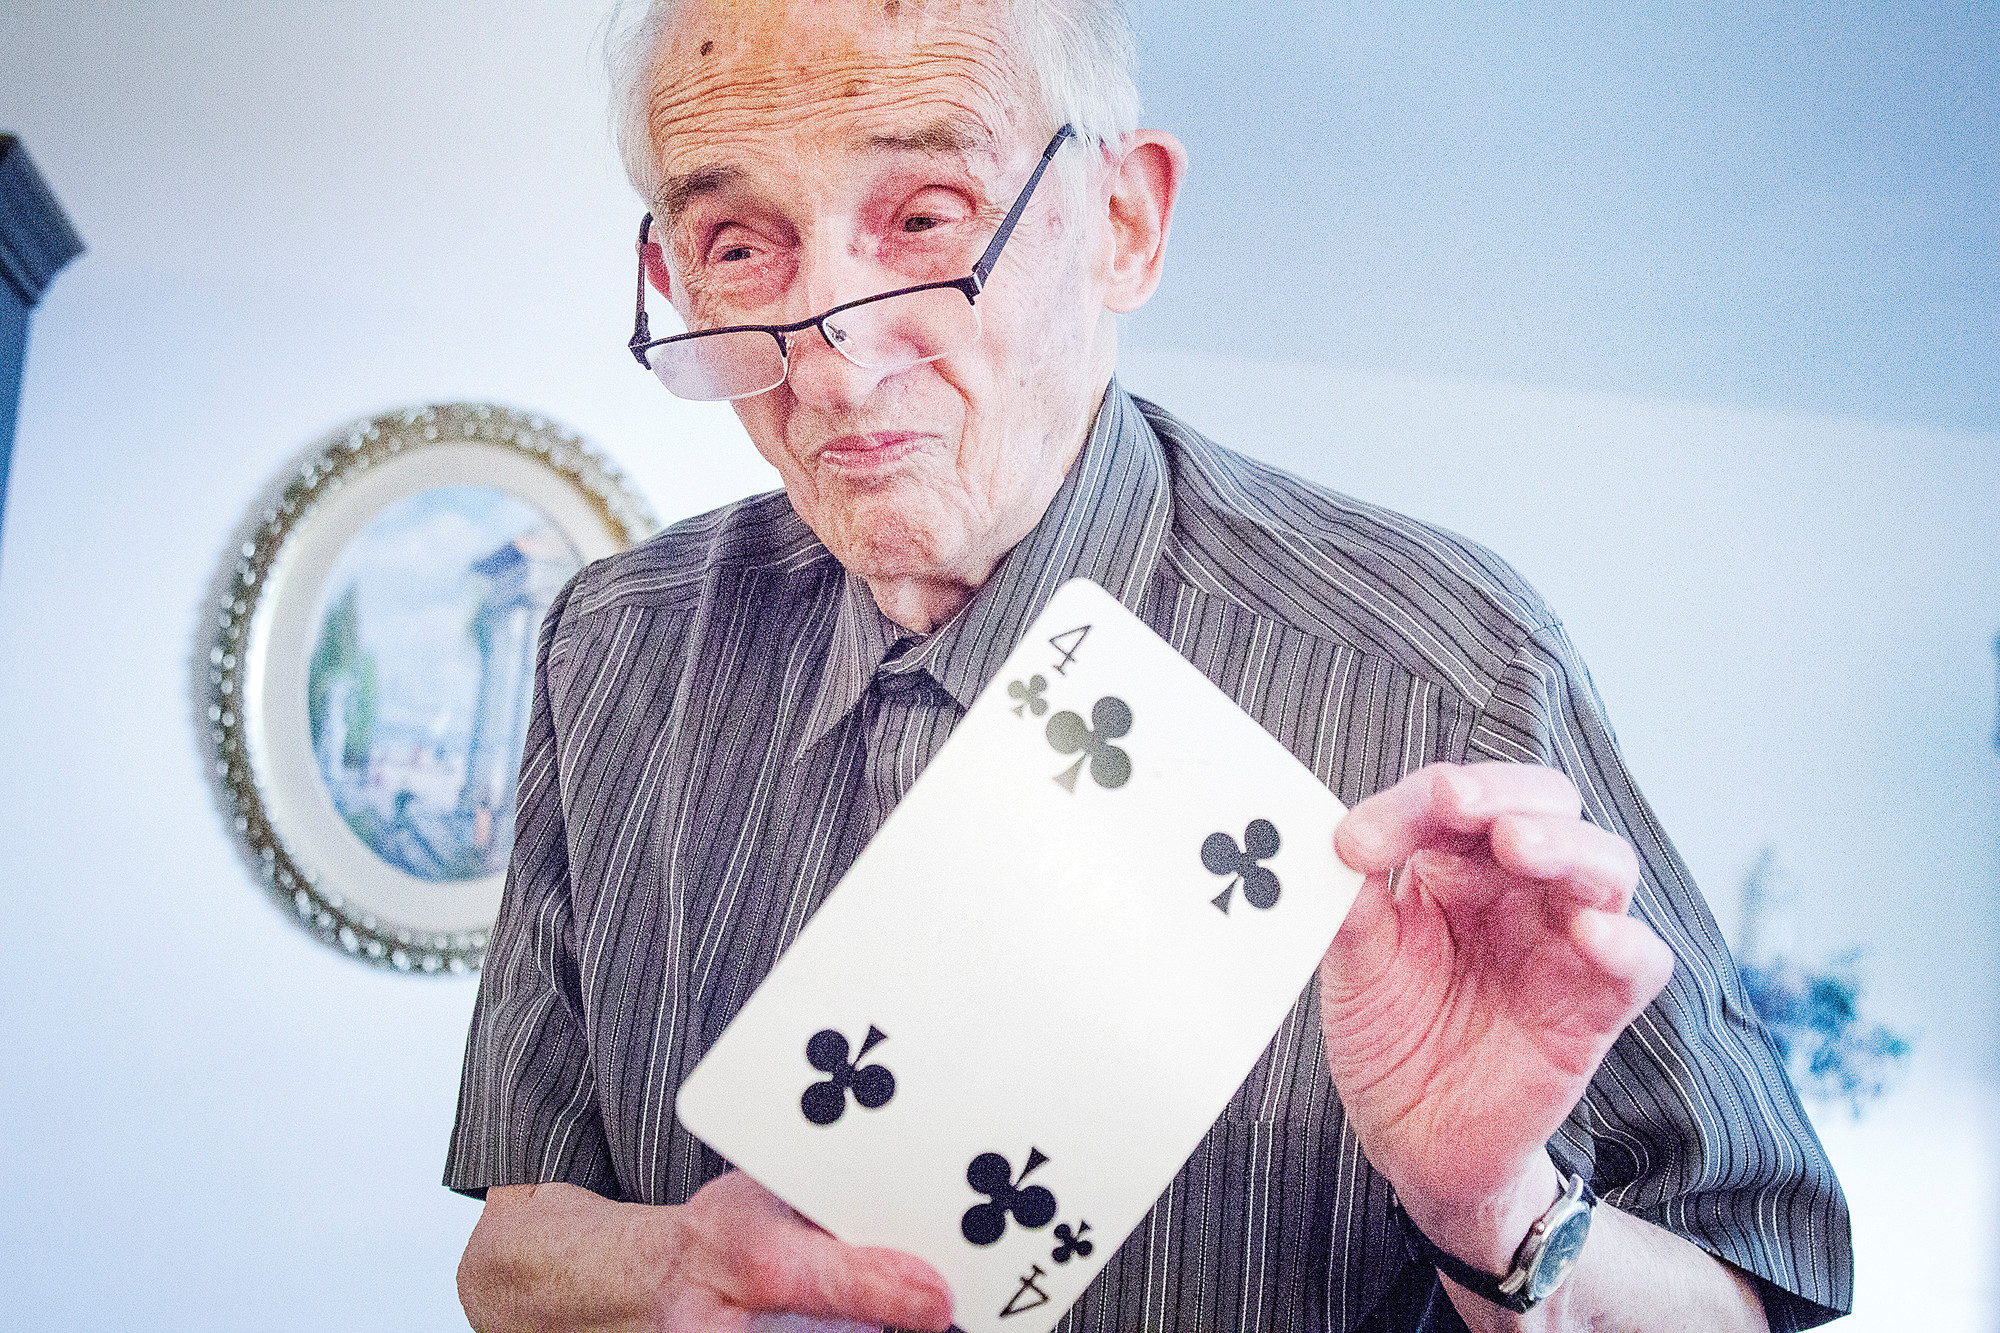 Jerry Oppenheimer, 93, the Society of American Magicians' Magician of the Year, demonstrates one of his card tricks at his home on June 19.